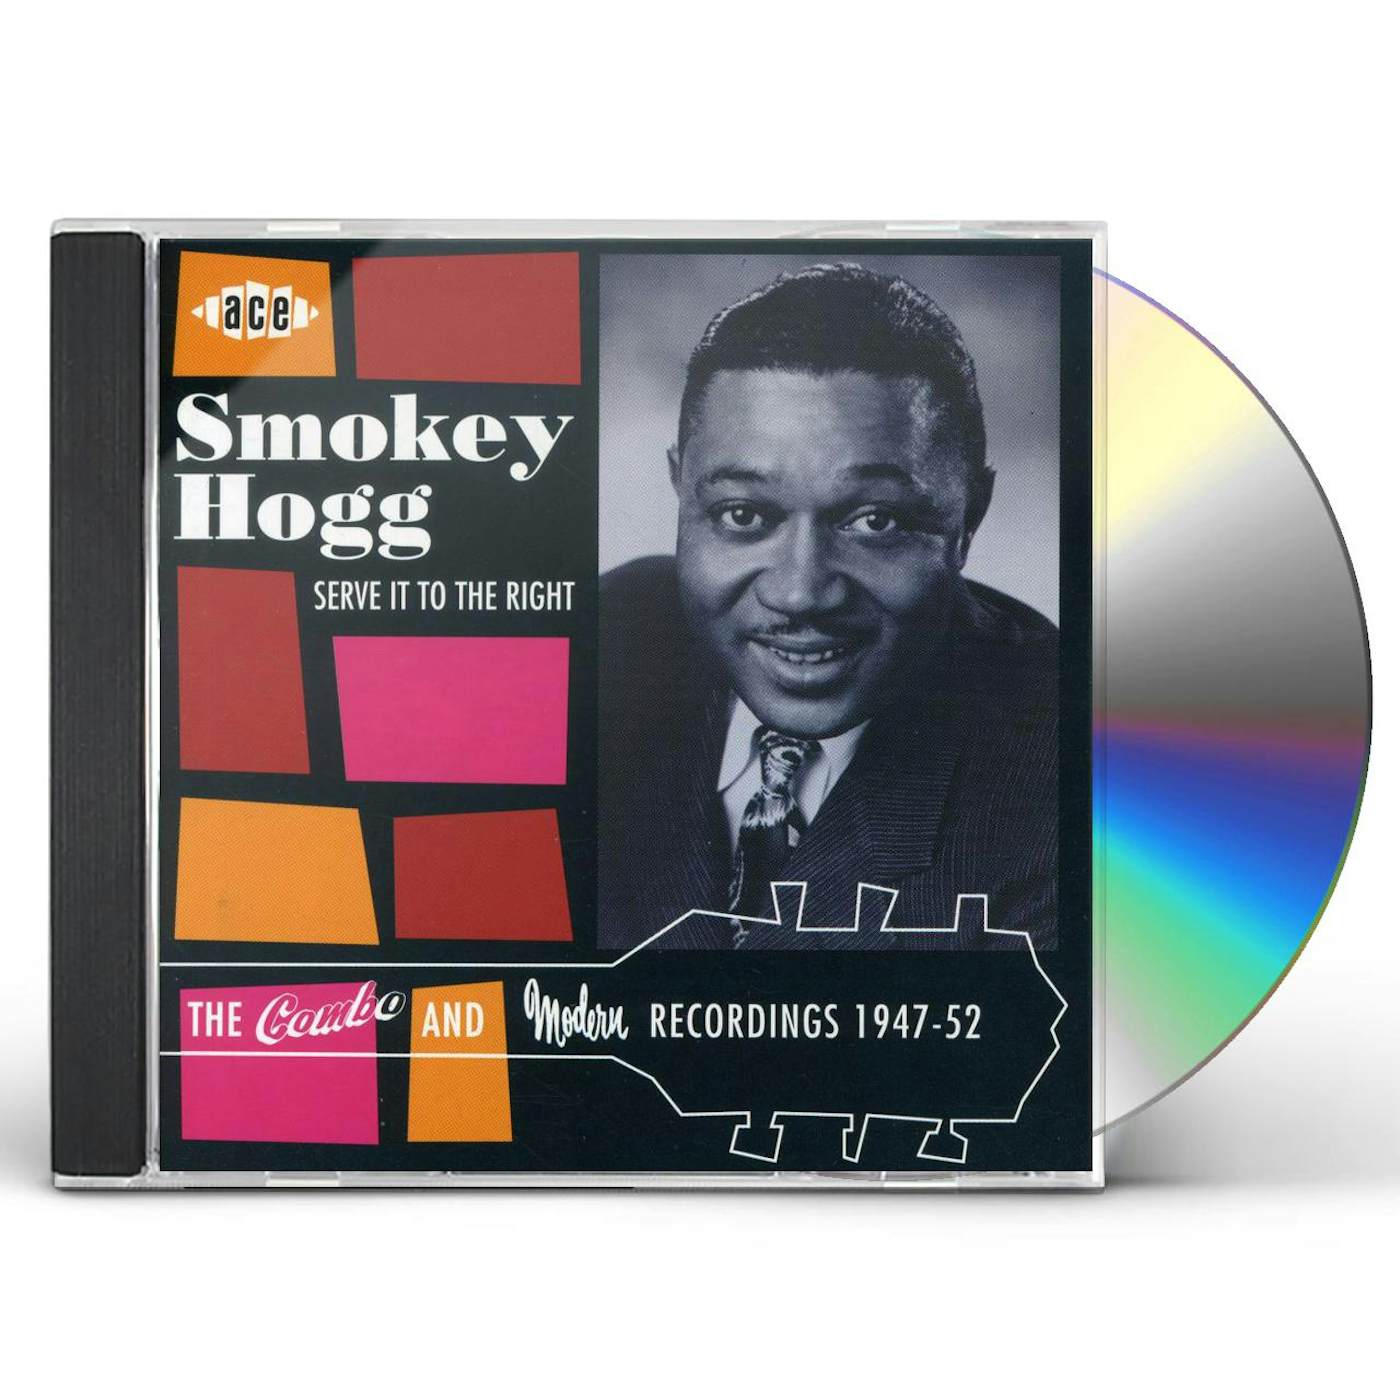 Smokey Hogg SERVE IT TO THE RIGHT: COMBO & MODERN RECORDINGS CD